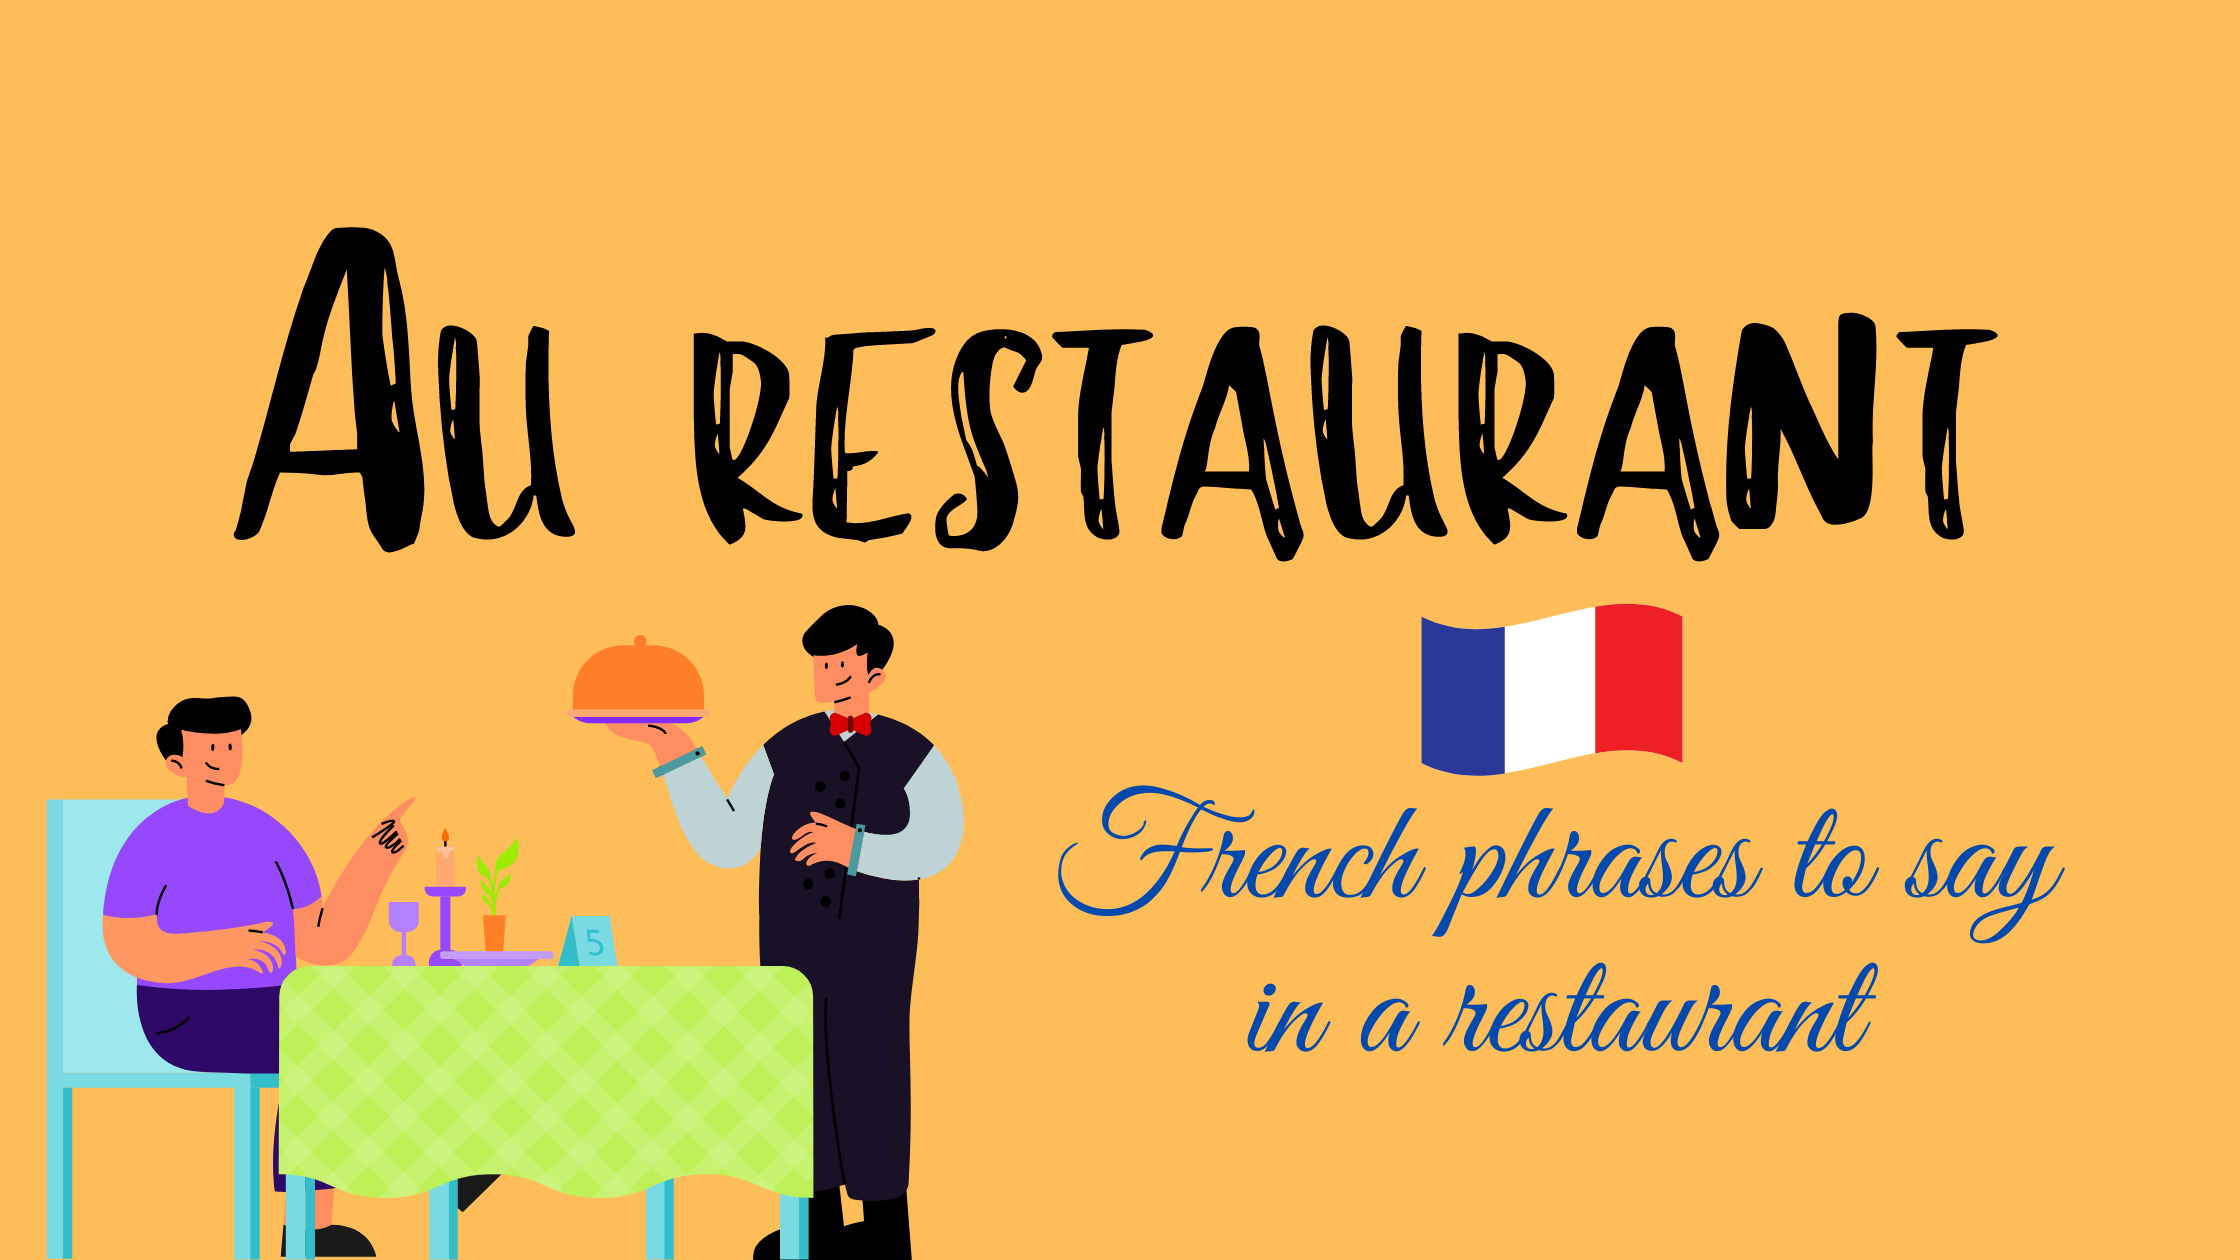 French phrases to say in a restaurant